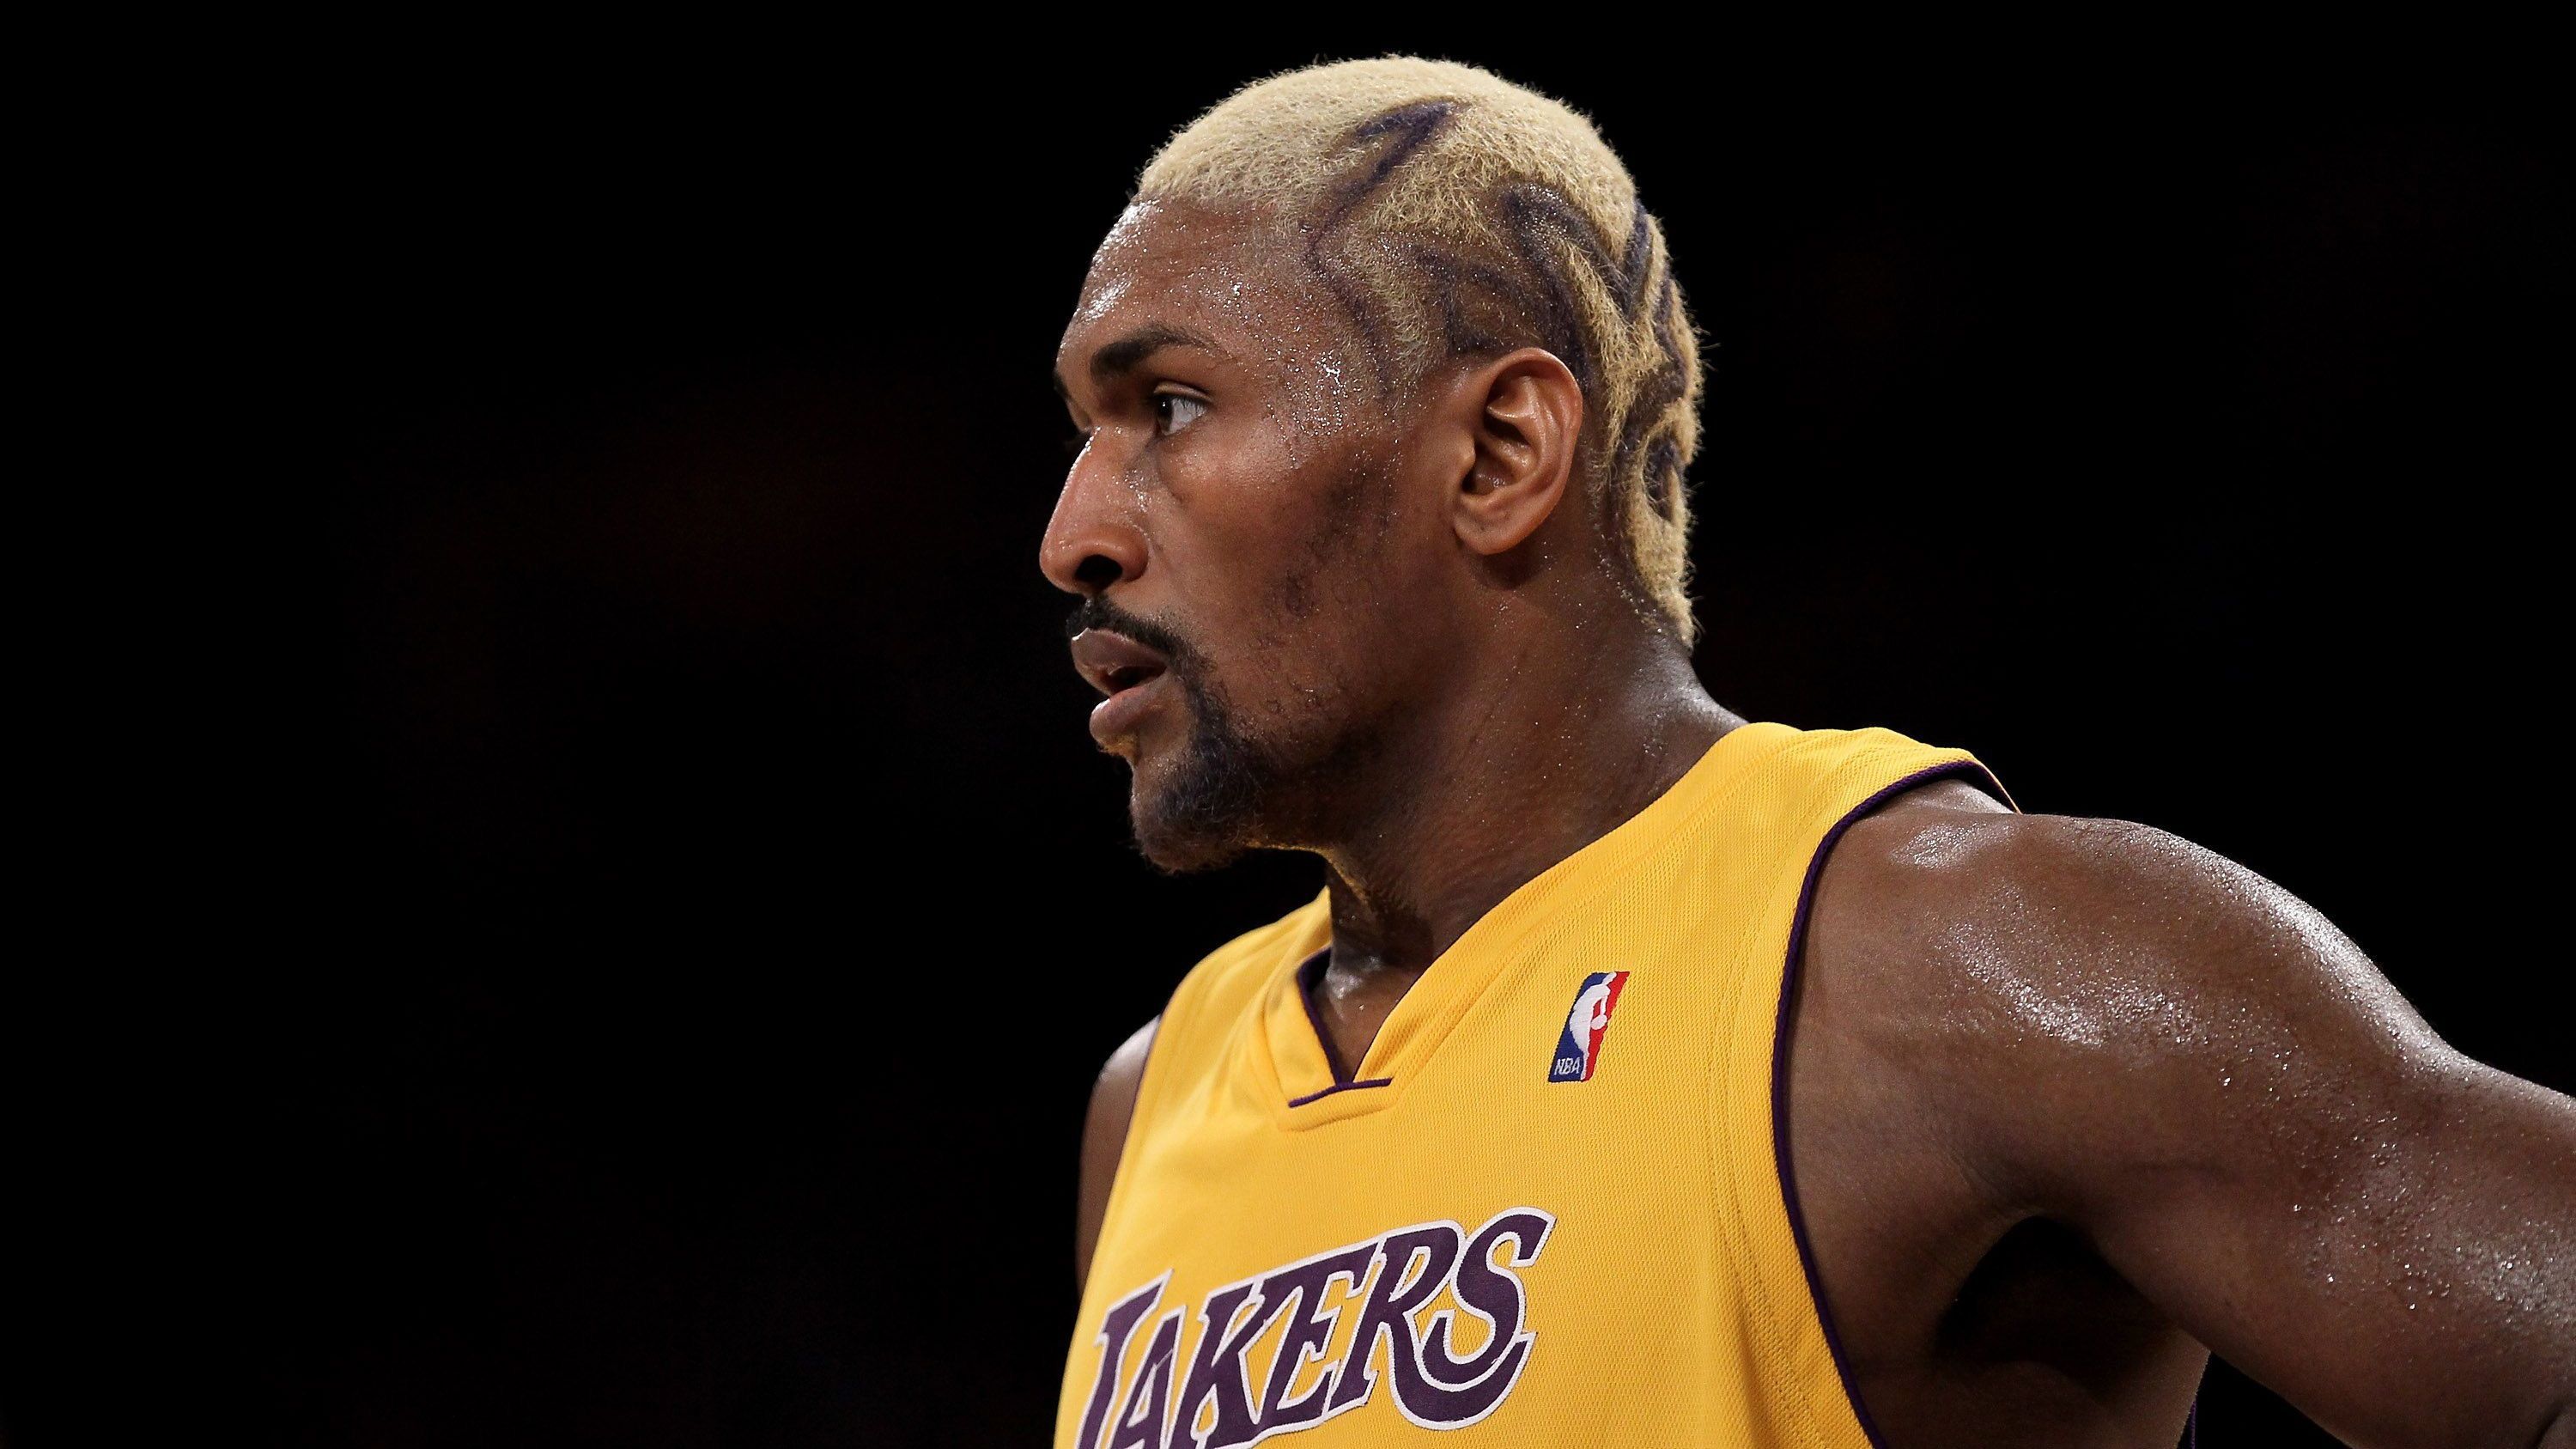 <strong>Ron Artest (Metta World Peace)<br>Teams:</strong> Chicago Bulls, Indiana Pacers, Sacramento Kings, Houston Rockets, Los Angeles Lakers